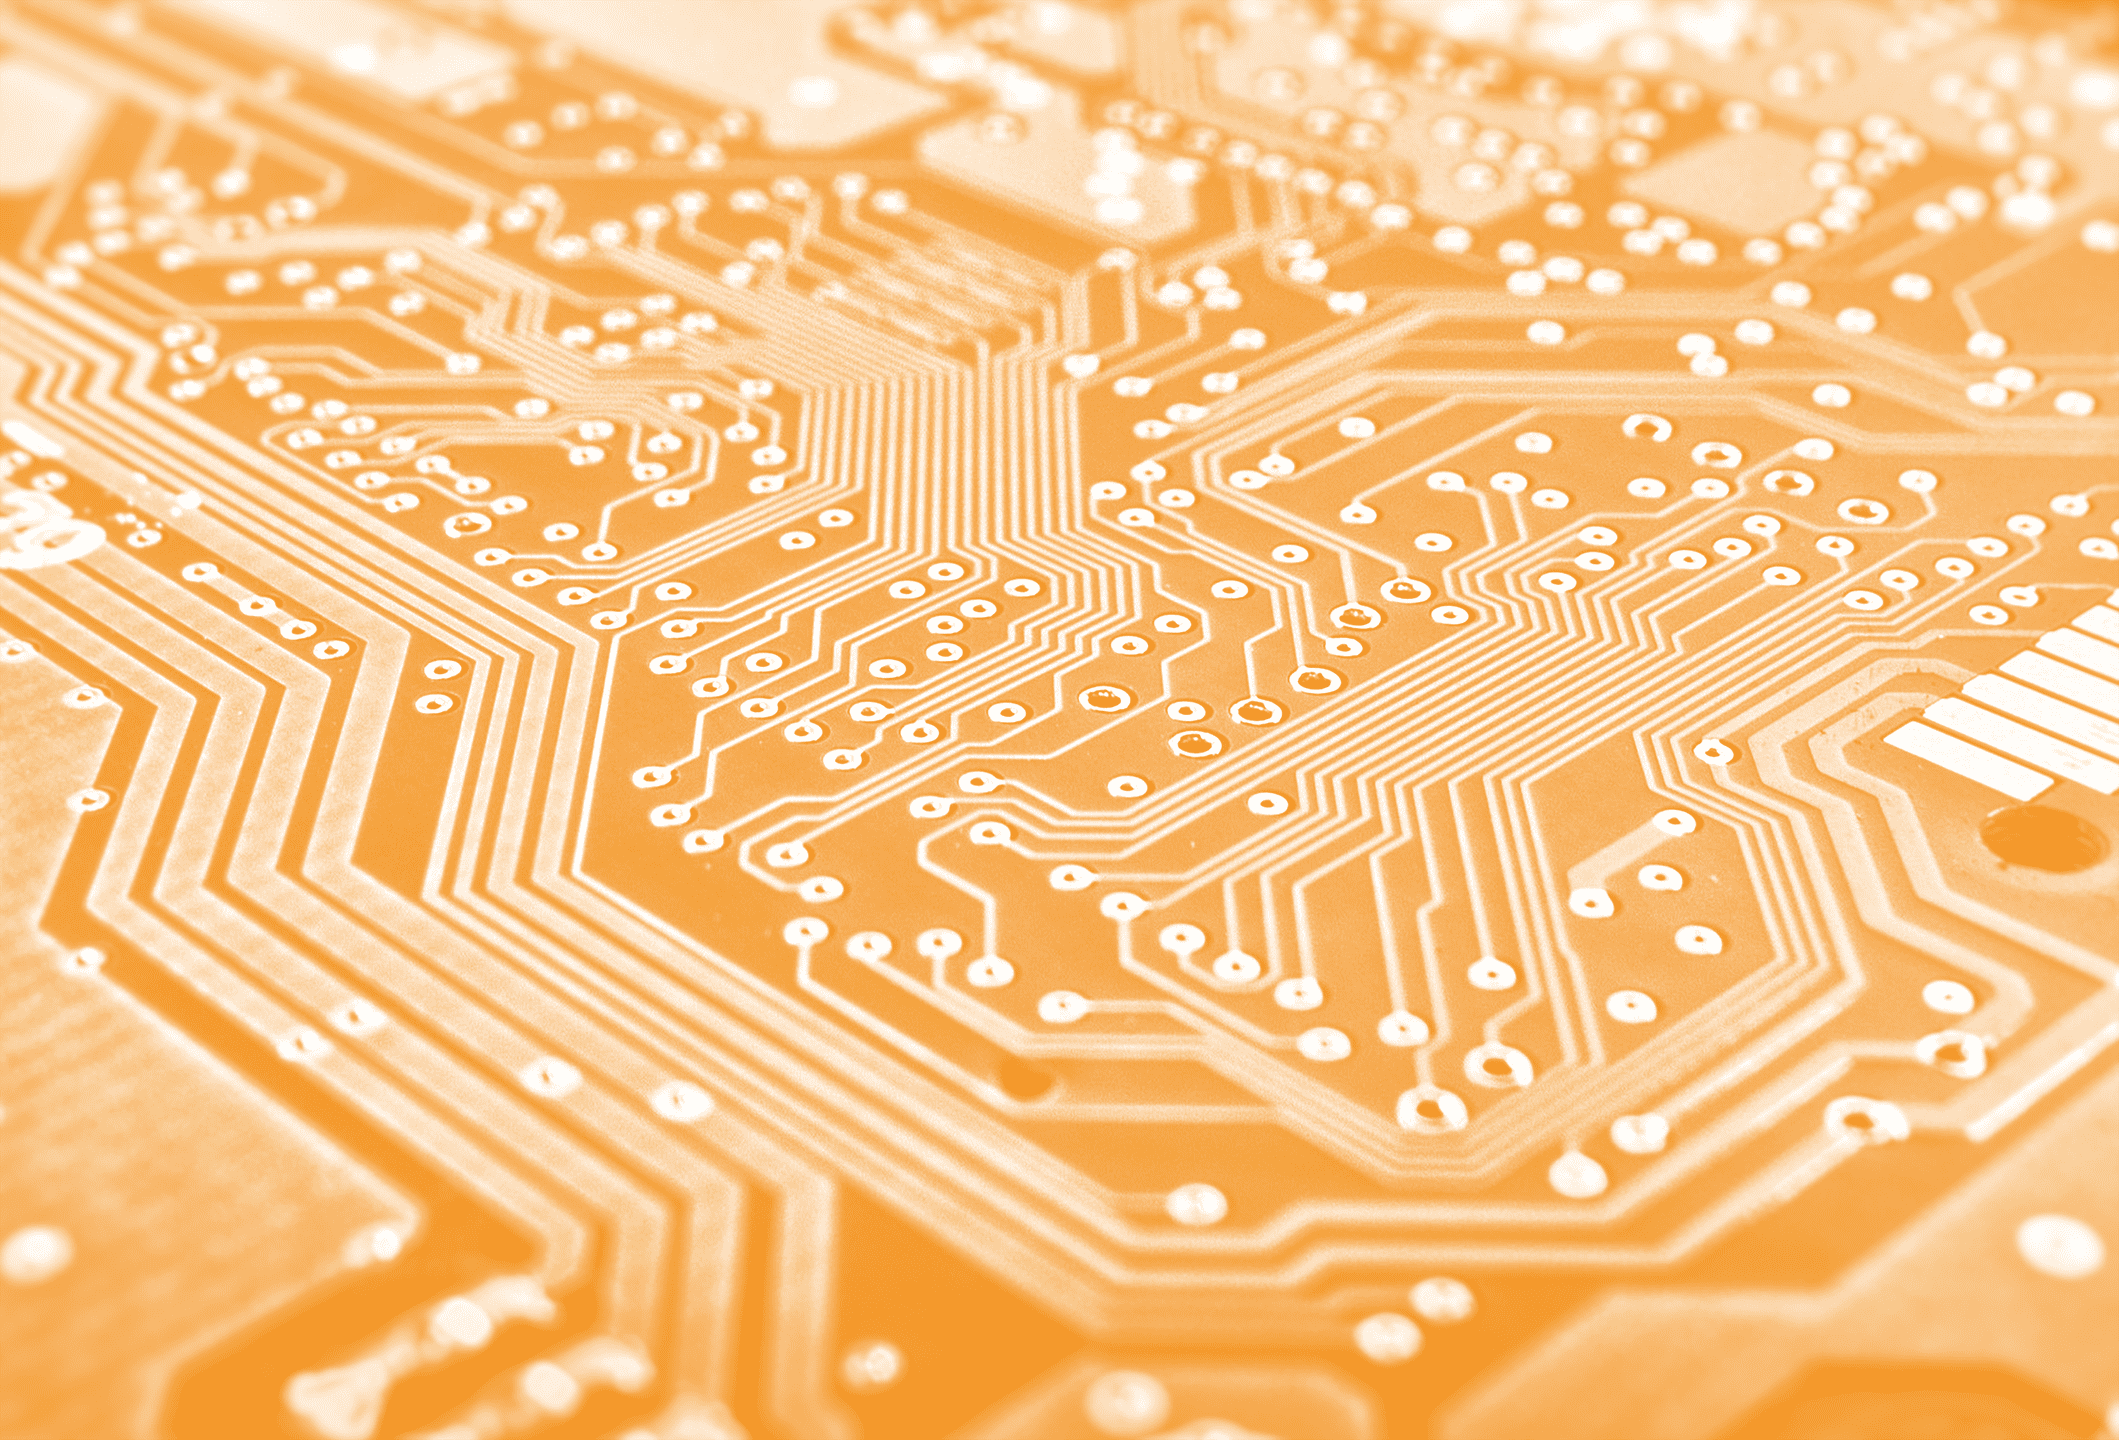 Background of electronic components, composed of a PCB board in corporate orange color